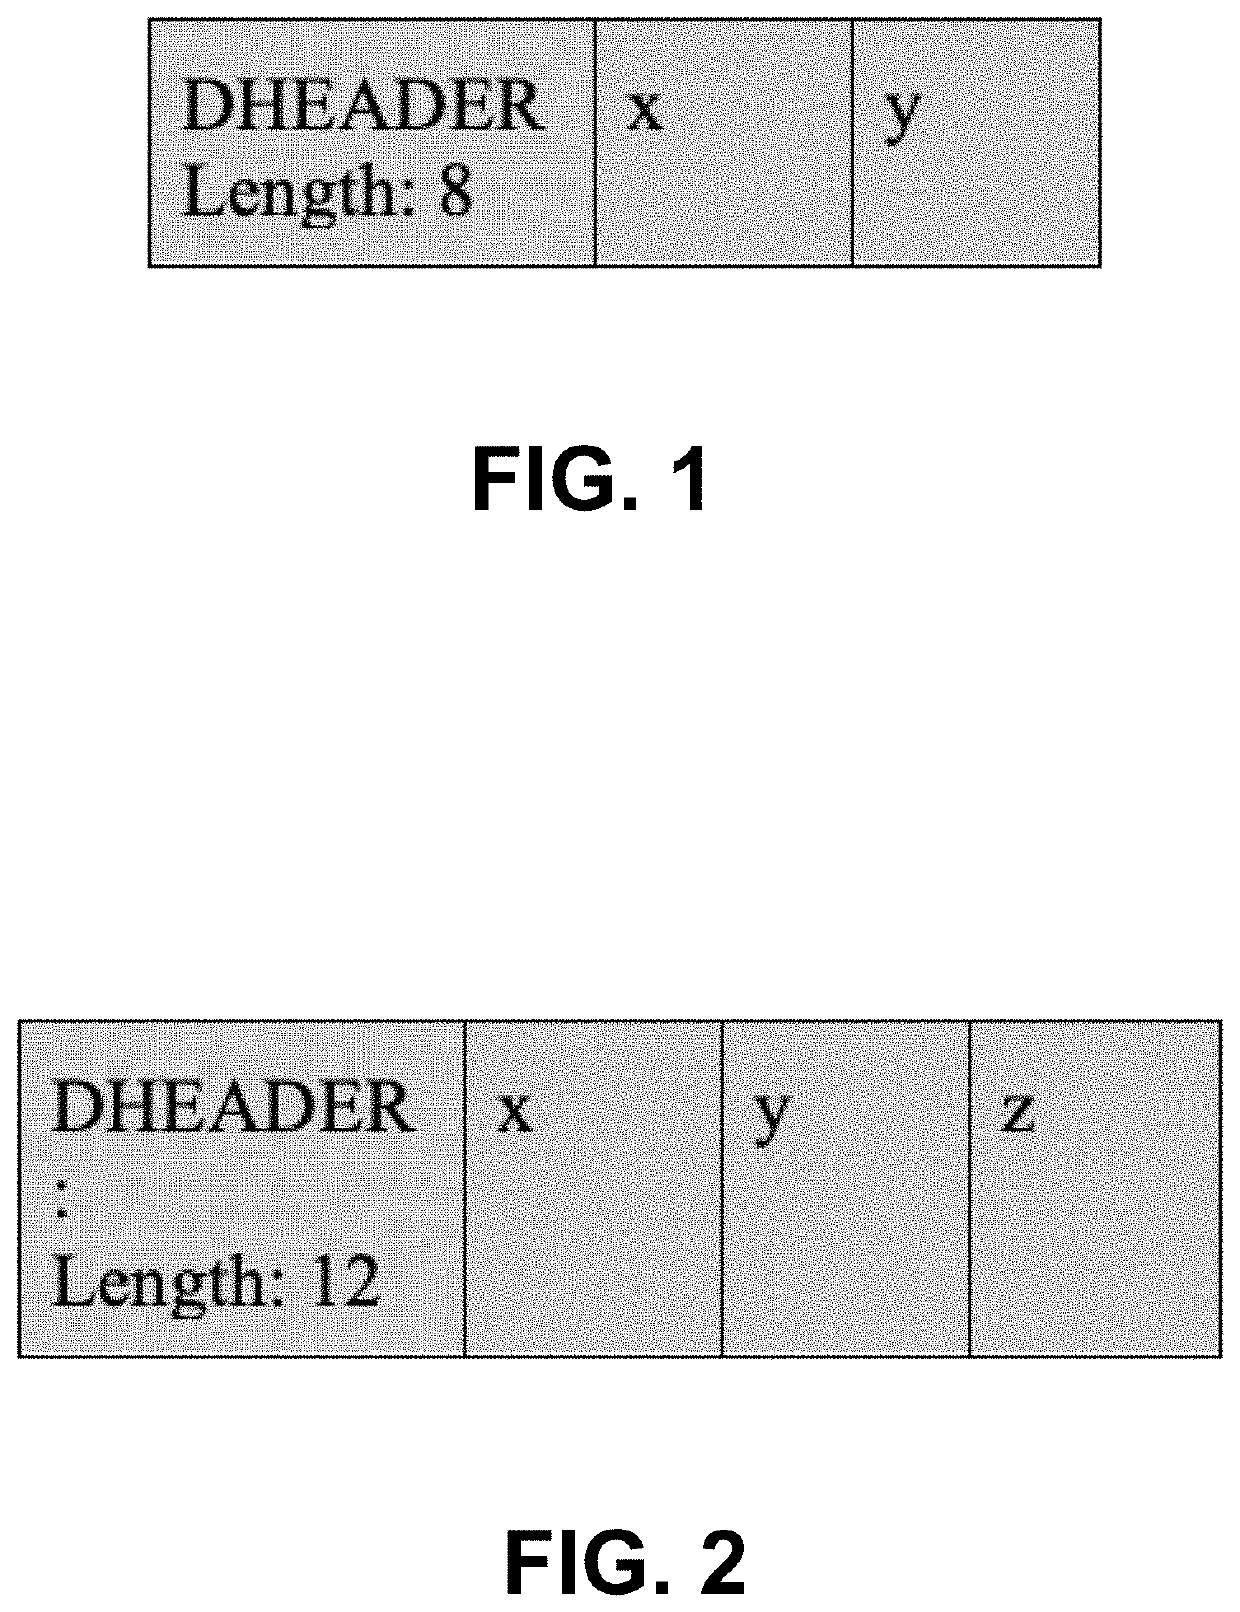 Language binding for DDS types that allows publishing and receiving data without marshaling